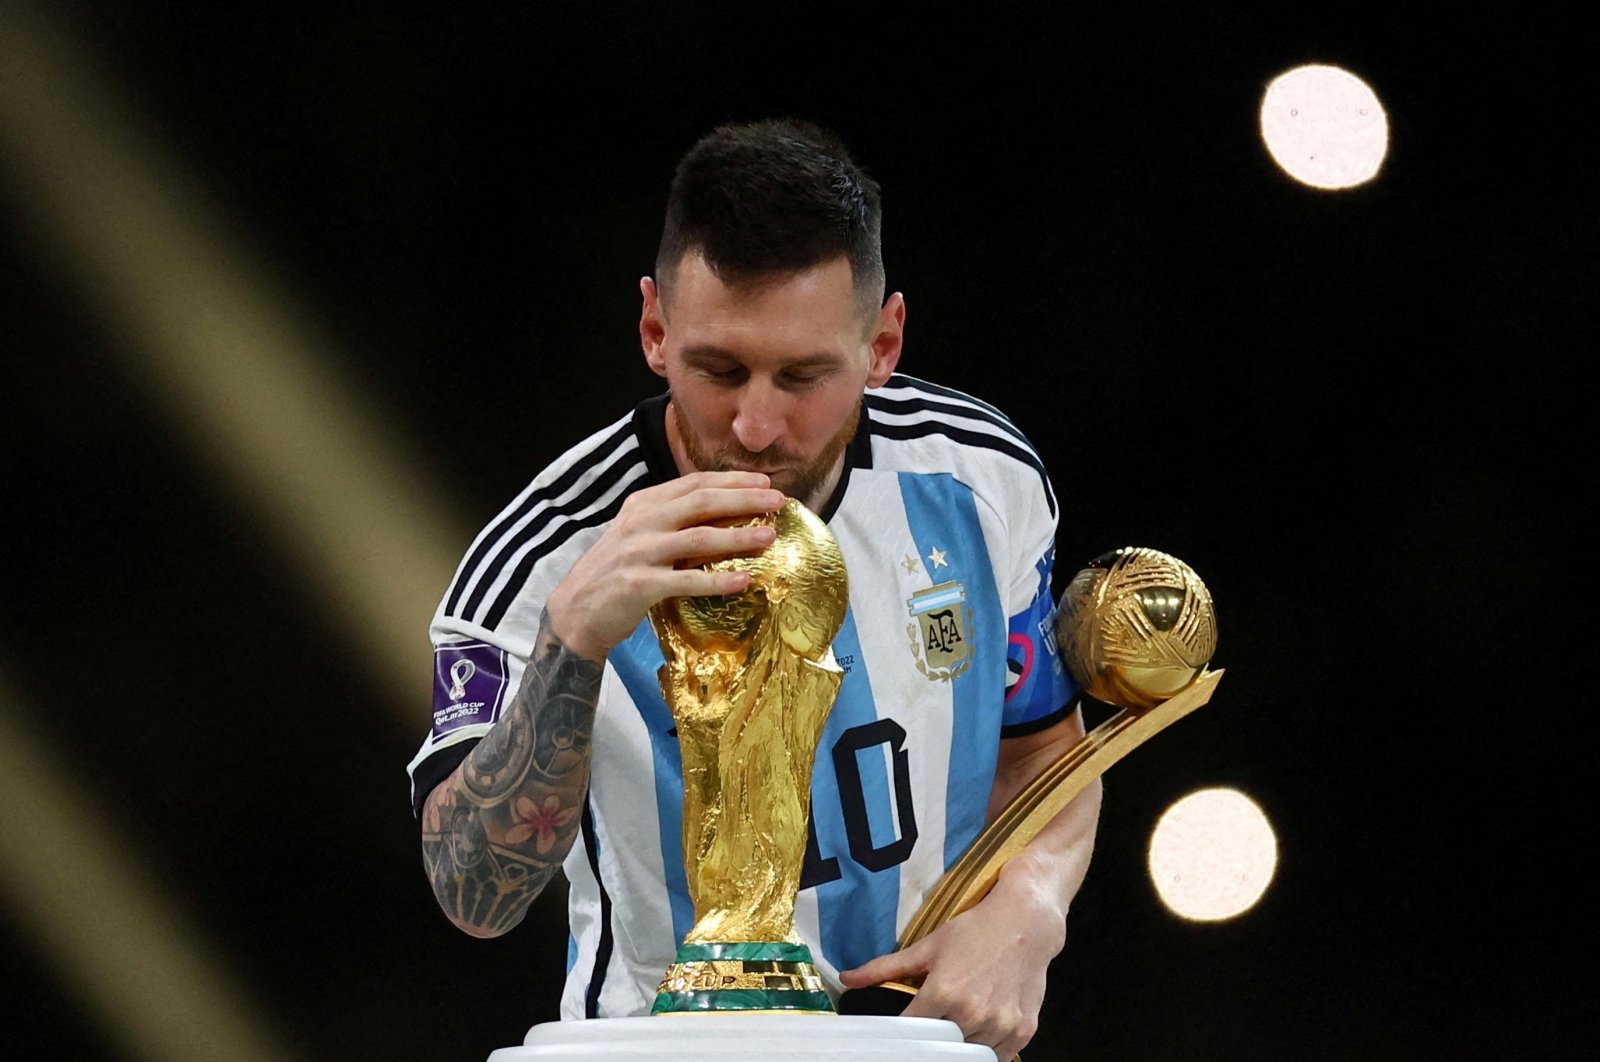 Argentina&#039;s Lionel Messi kisses the World Cup trophy after receiving the Golden Ball award as he celebrates after winning the World Cup final against France at the Lusail Stadium, Lusail, Qatar, Dec. 18, 2022. (Reuters Photo)